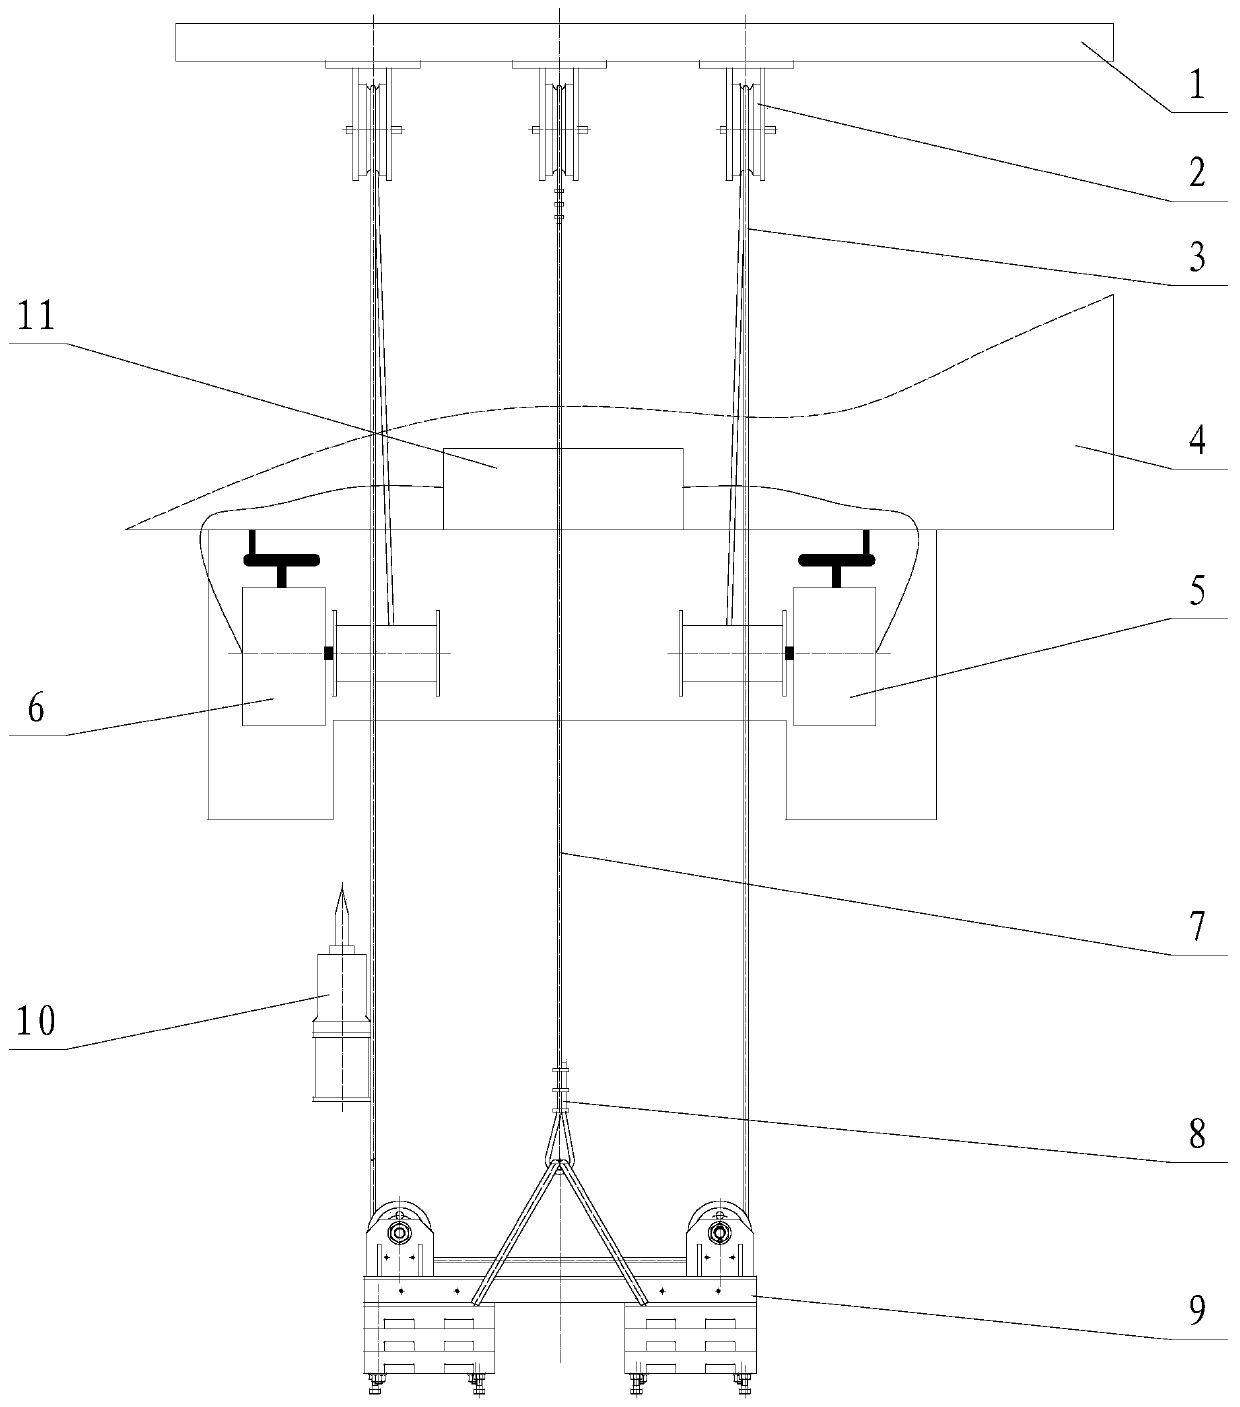 Ocean Vertical Profile Automatic Observation System and Method Based on Offshore Oil Platform